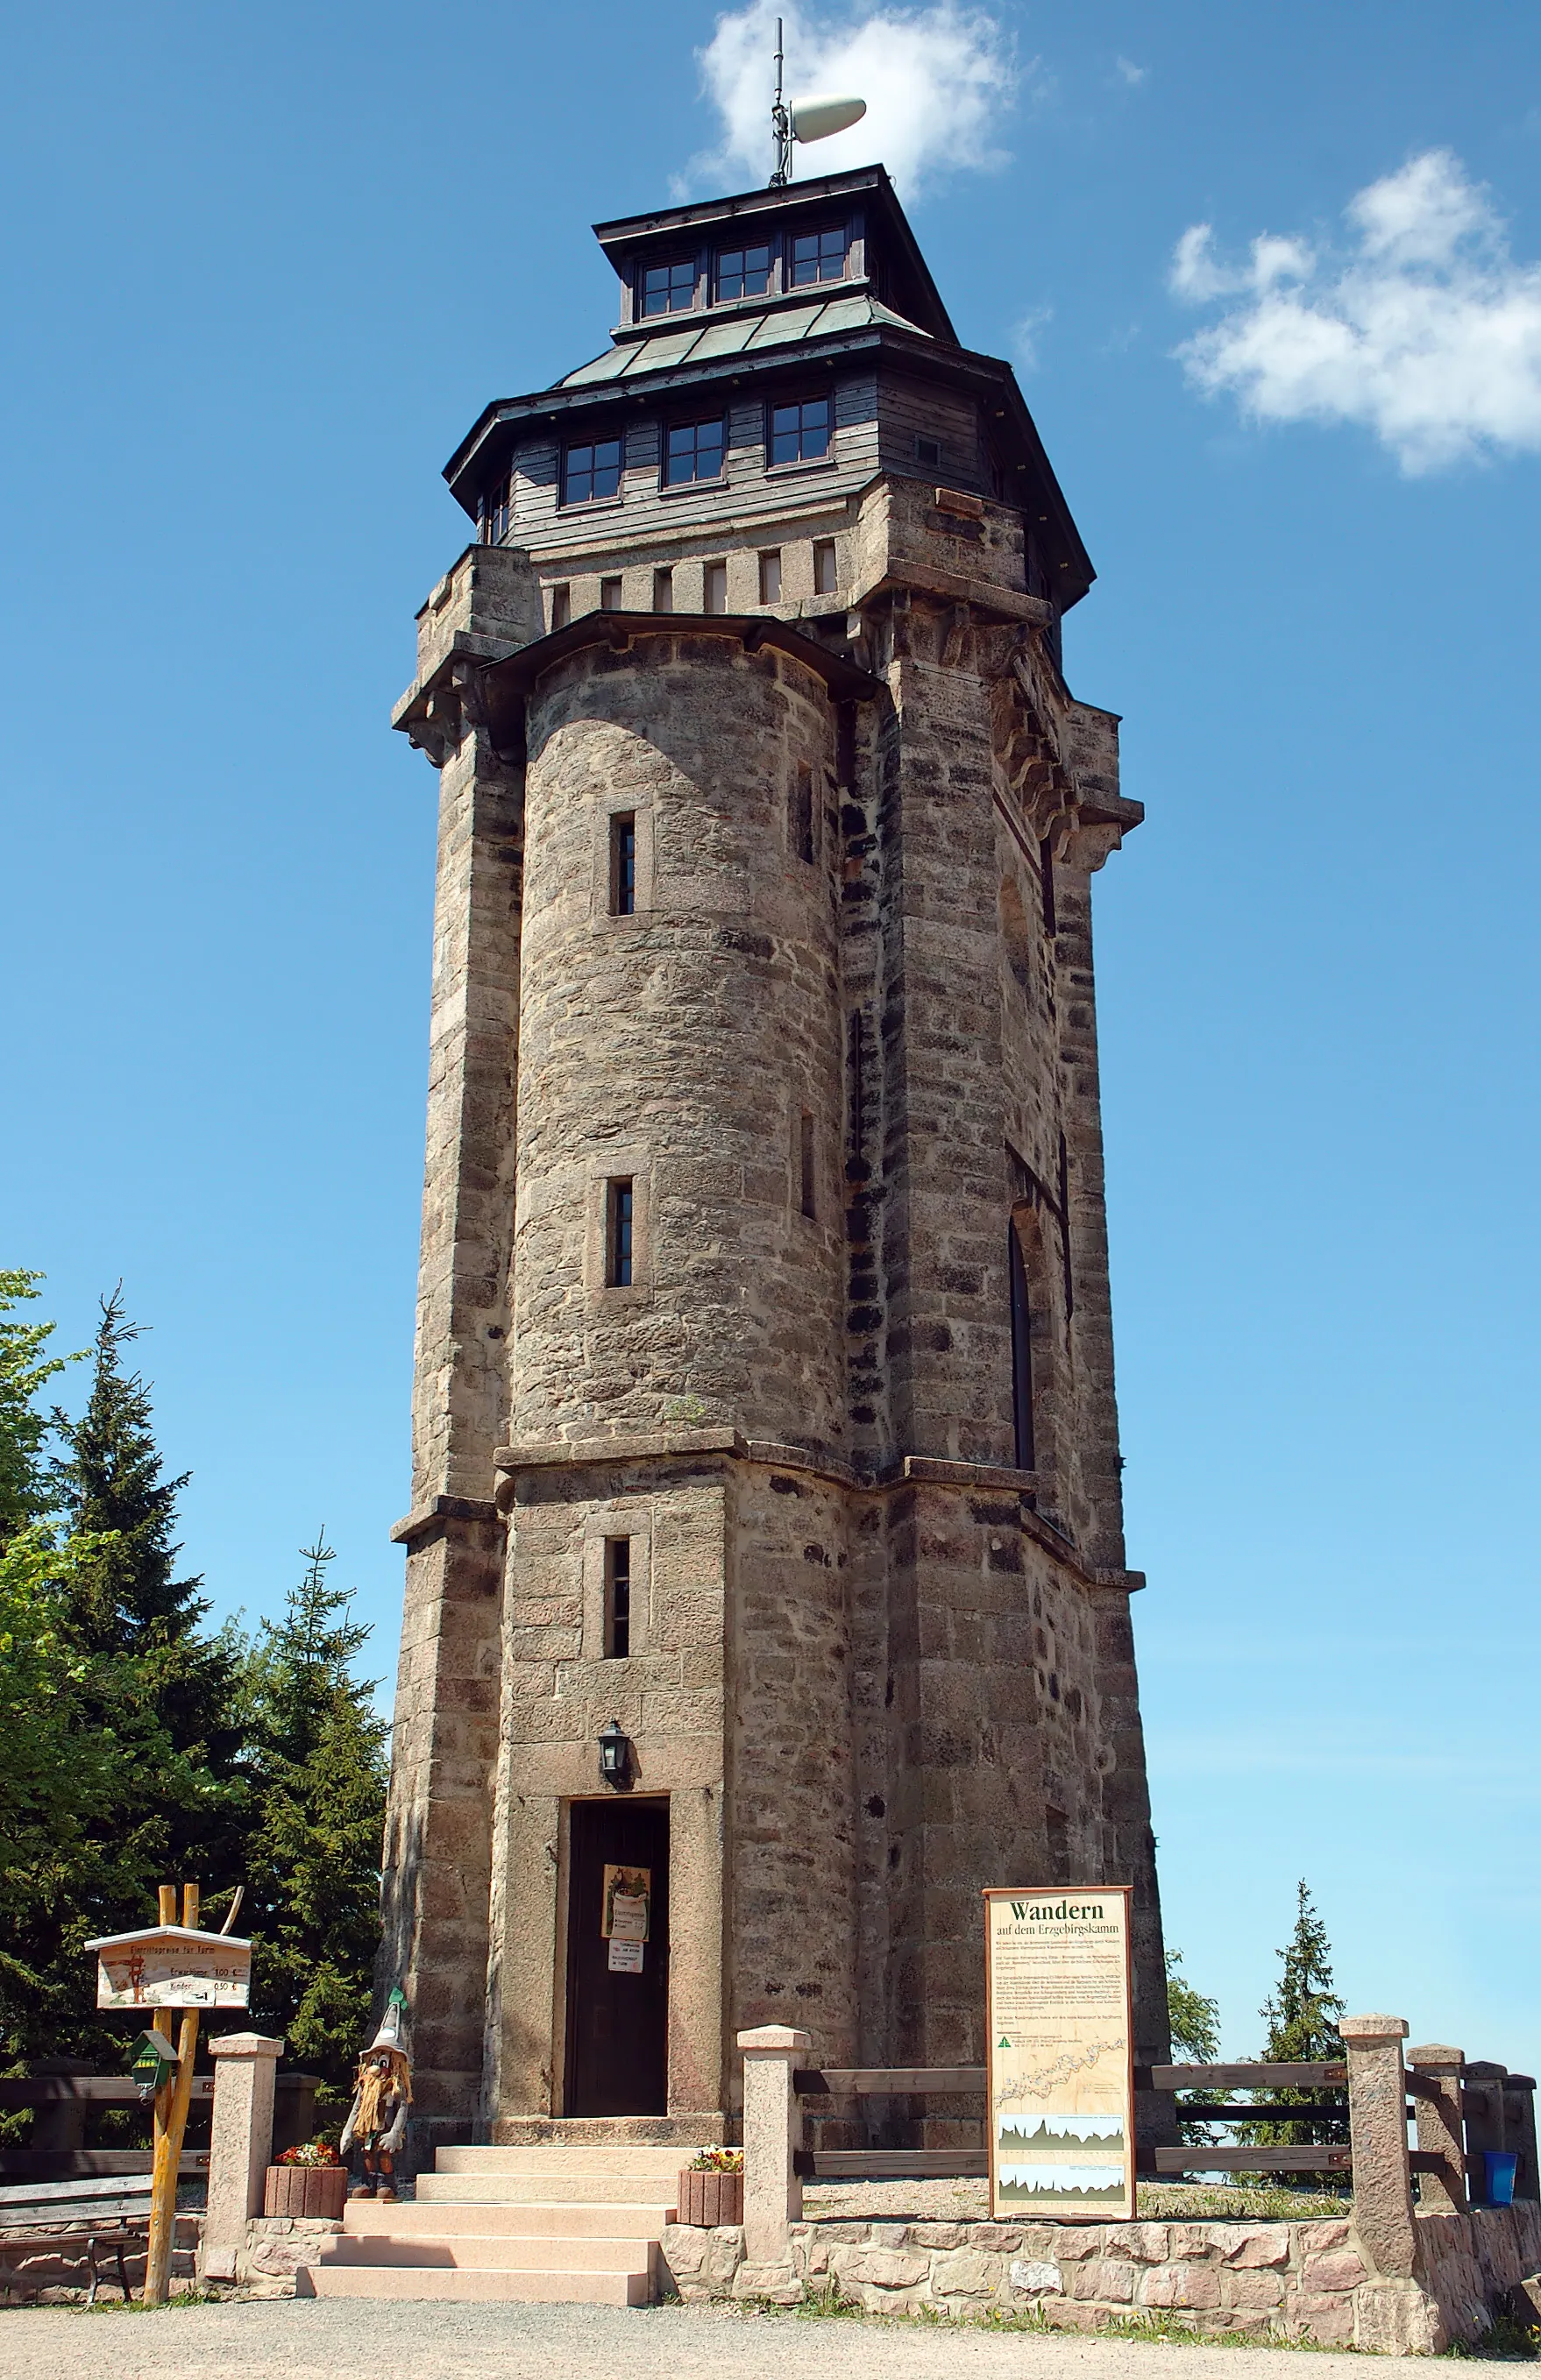 Photo showing: This image shows the observation tower at the Auersberg (Saxony, Germany).